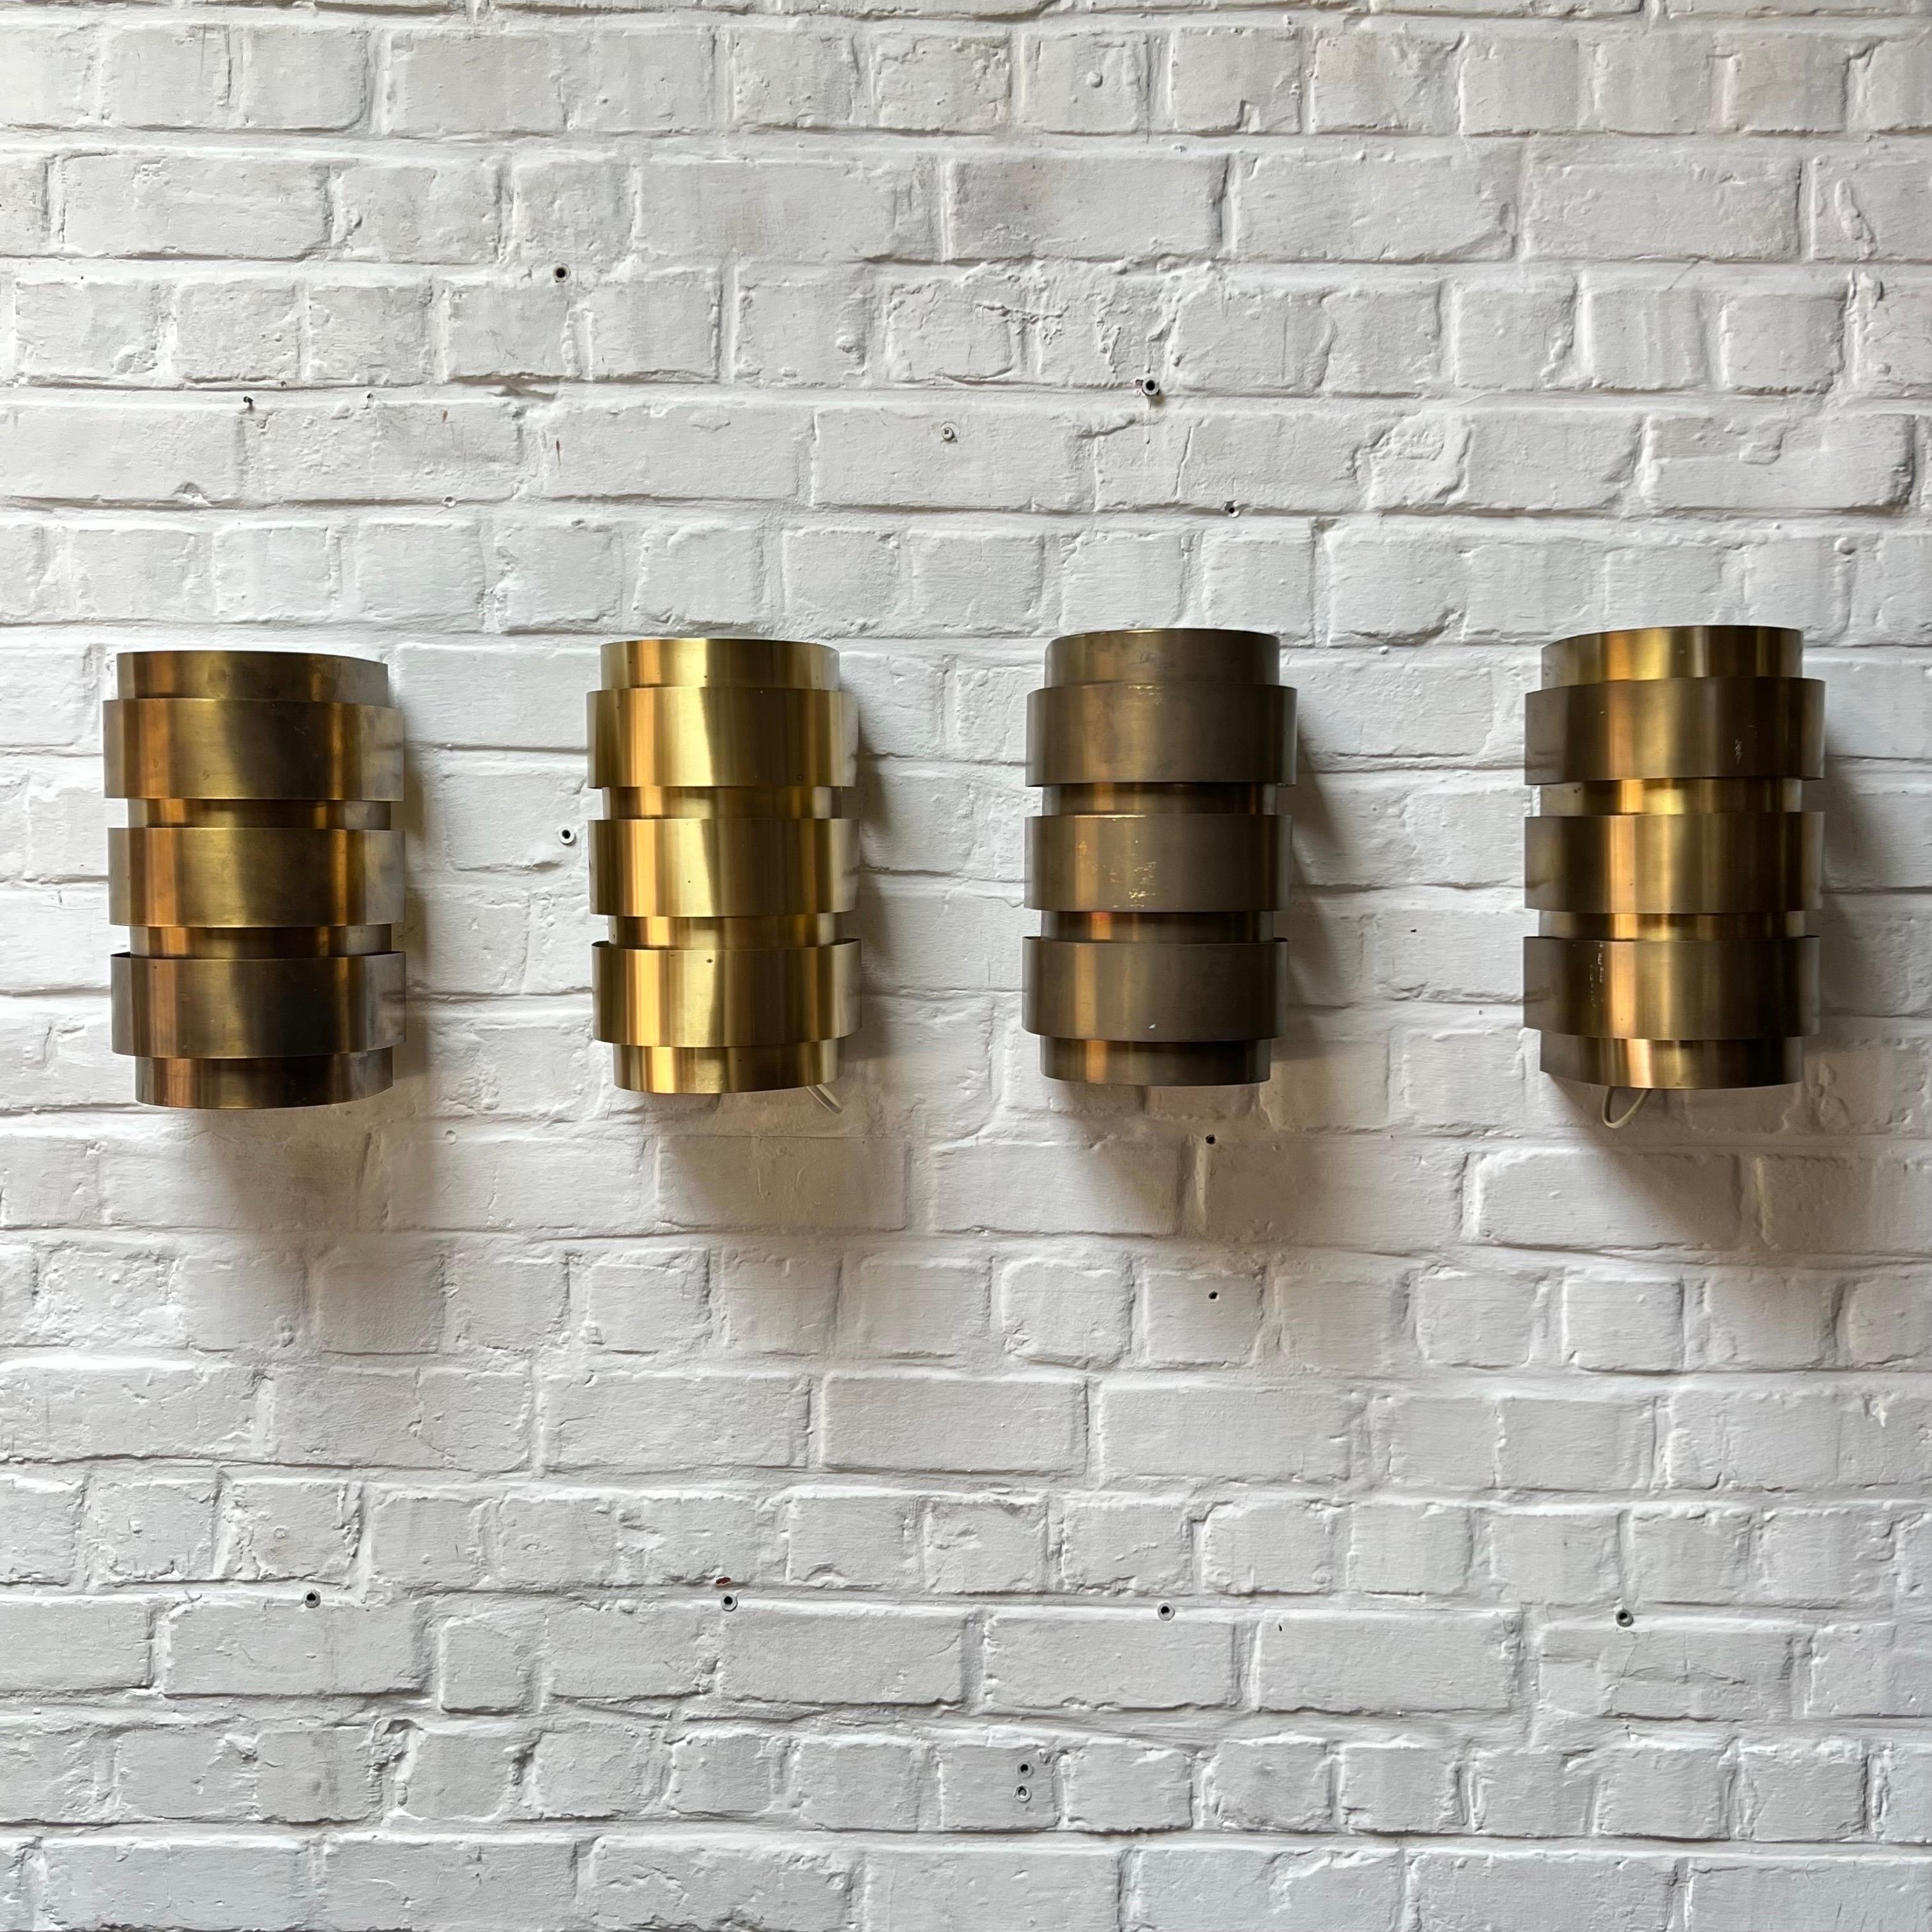 Nice set of 4 brass wall lamps. They provide a warm atmosphere and even better when lighted. Made of thin strips of brass delicately riveted with a brass nail to the metal frame. Minimal details. Great to have them as a set of 4 and especially in